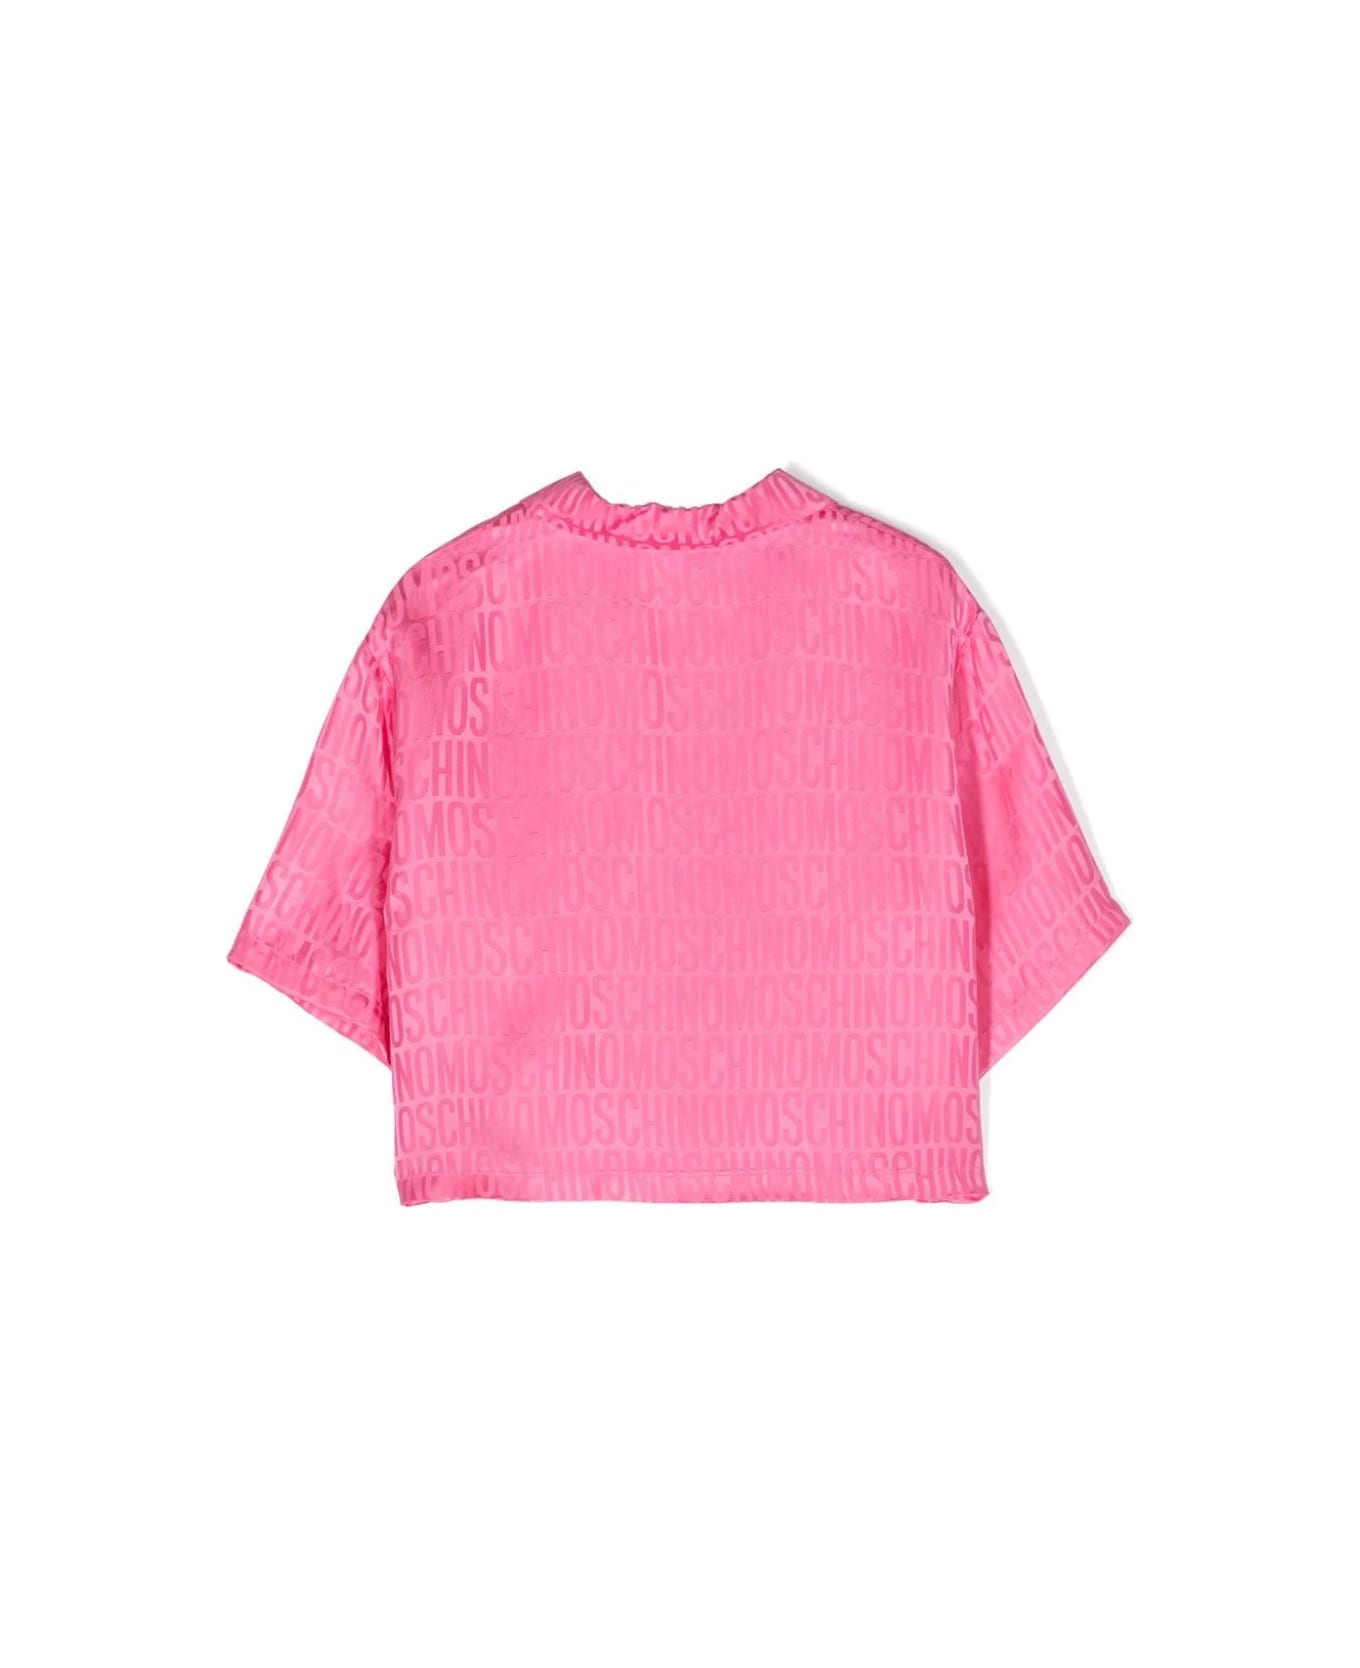 Moschino Pink Shirt With All-over Jacquard Logo - Pink シャツ